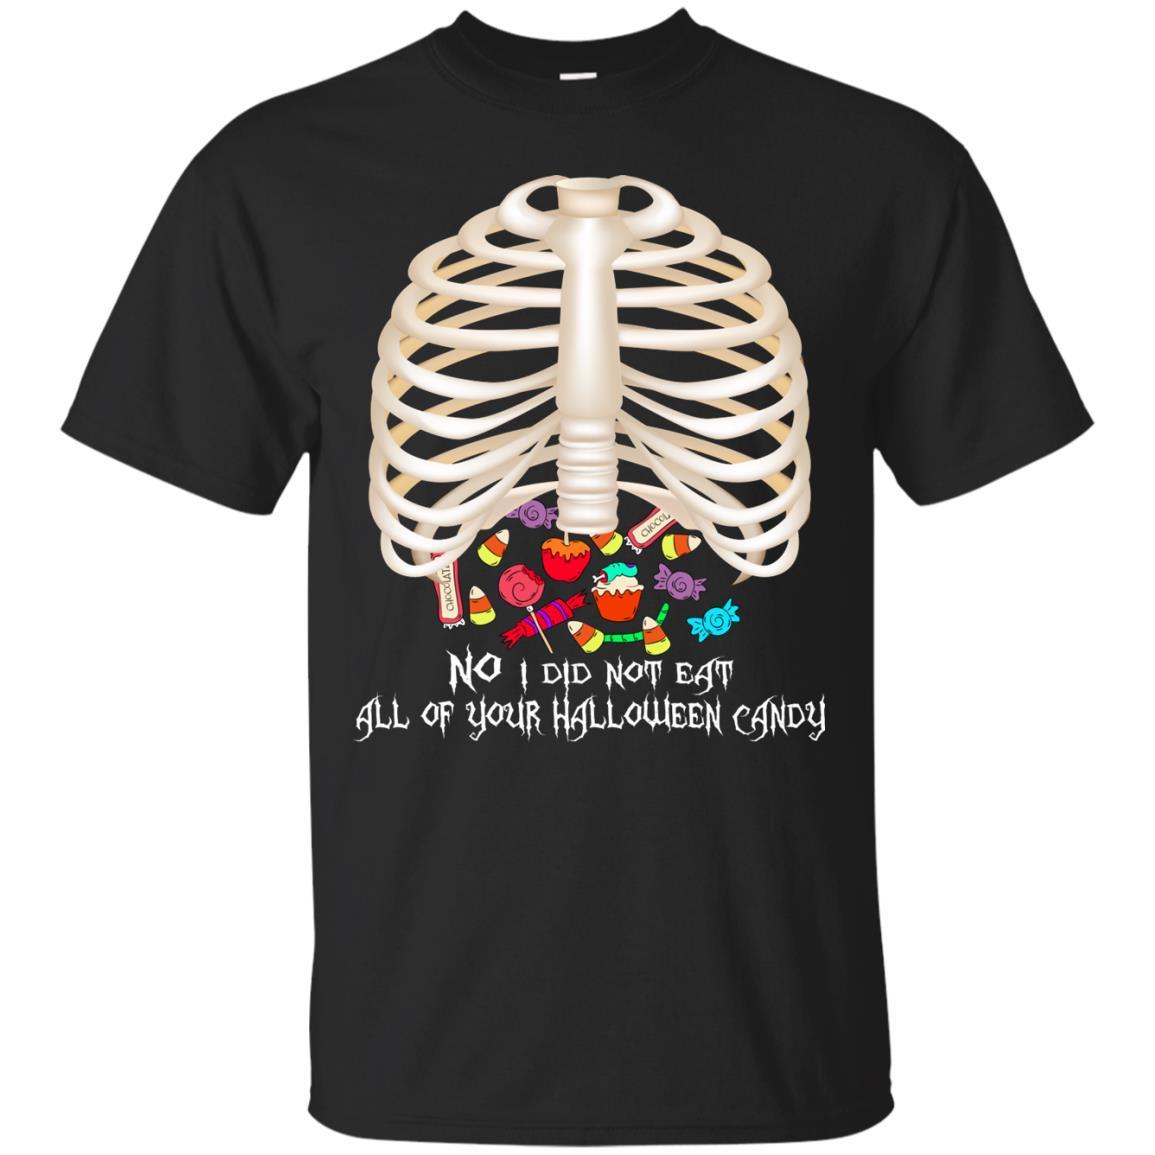 Funny shirt Halloween Candy Unisex Tees - GoneBold.gift